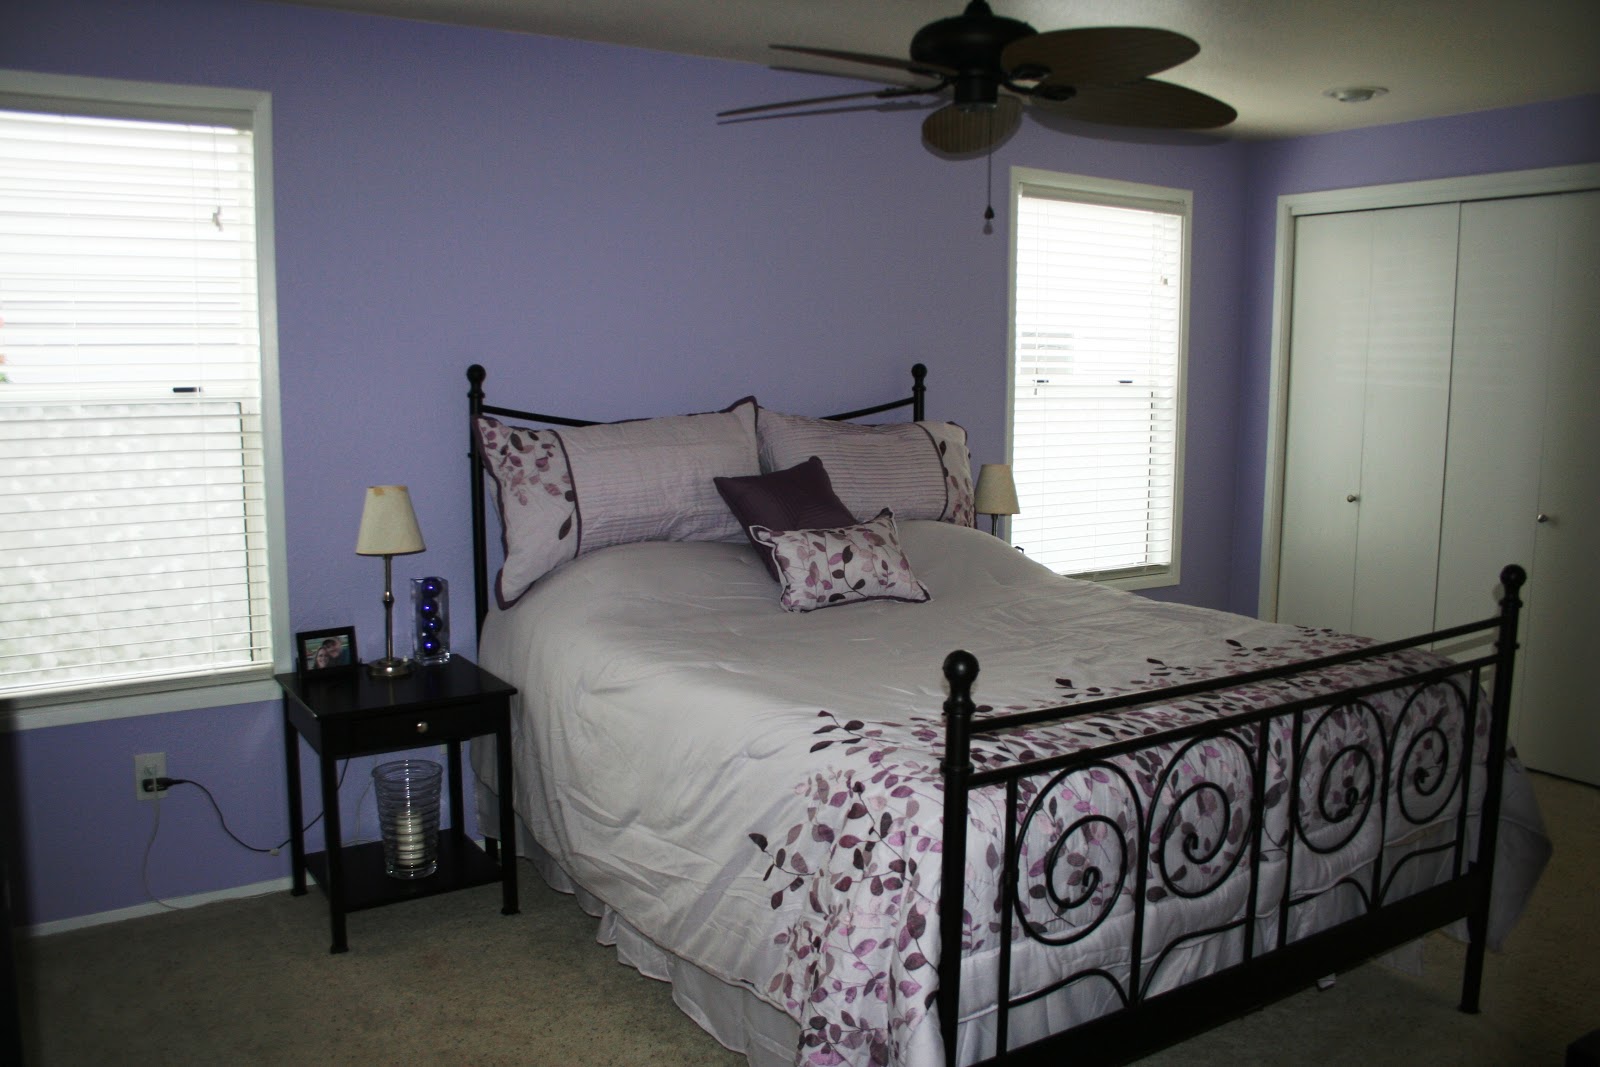 A Home...at last!: New Bedding